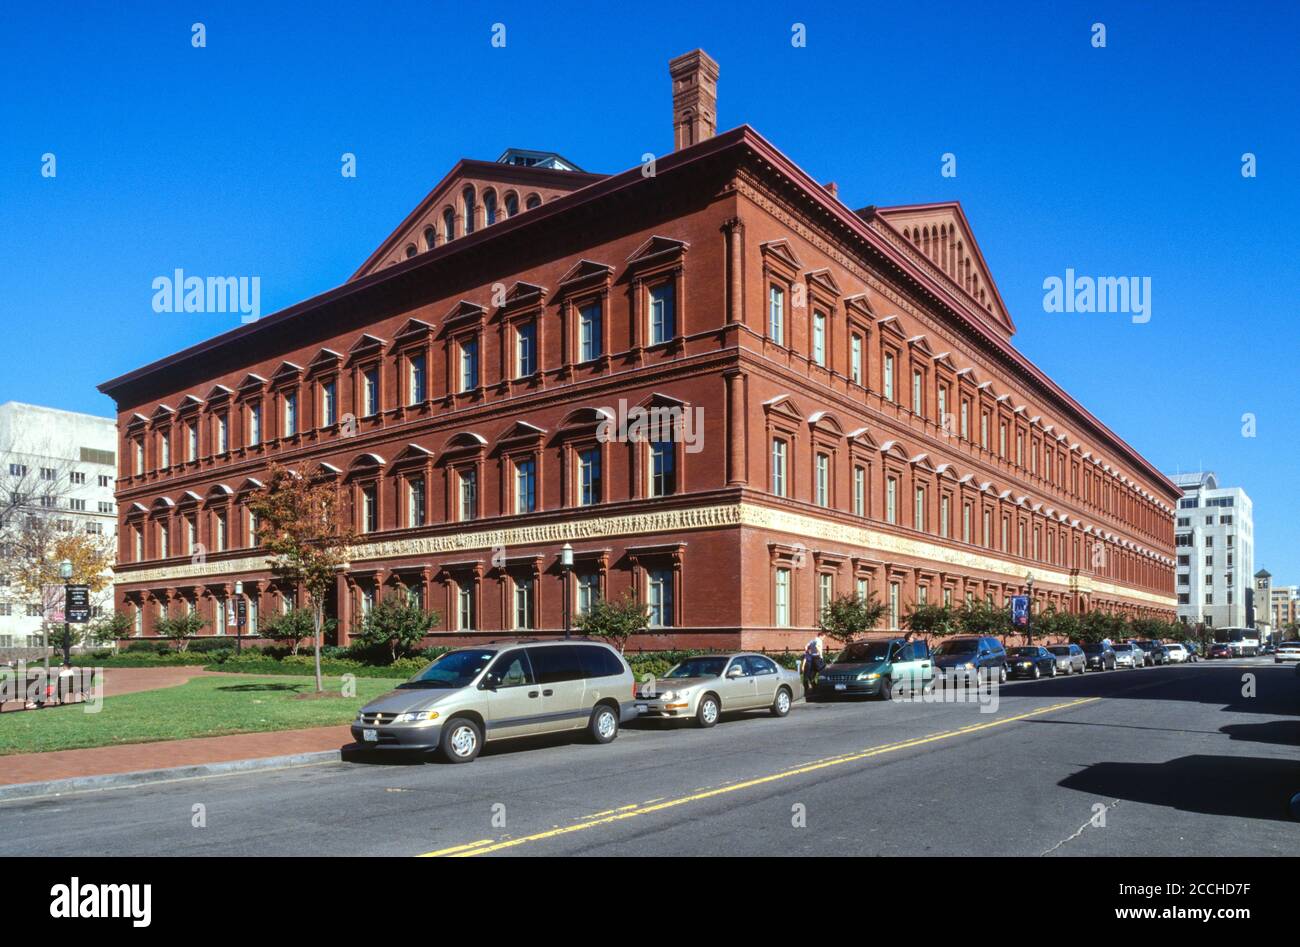 Washington, DC.  National Building Museum, formerly the Pension Building, for Civil War Veterans. Stock Photo